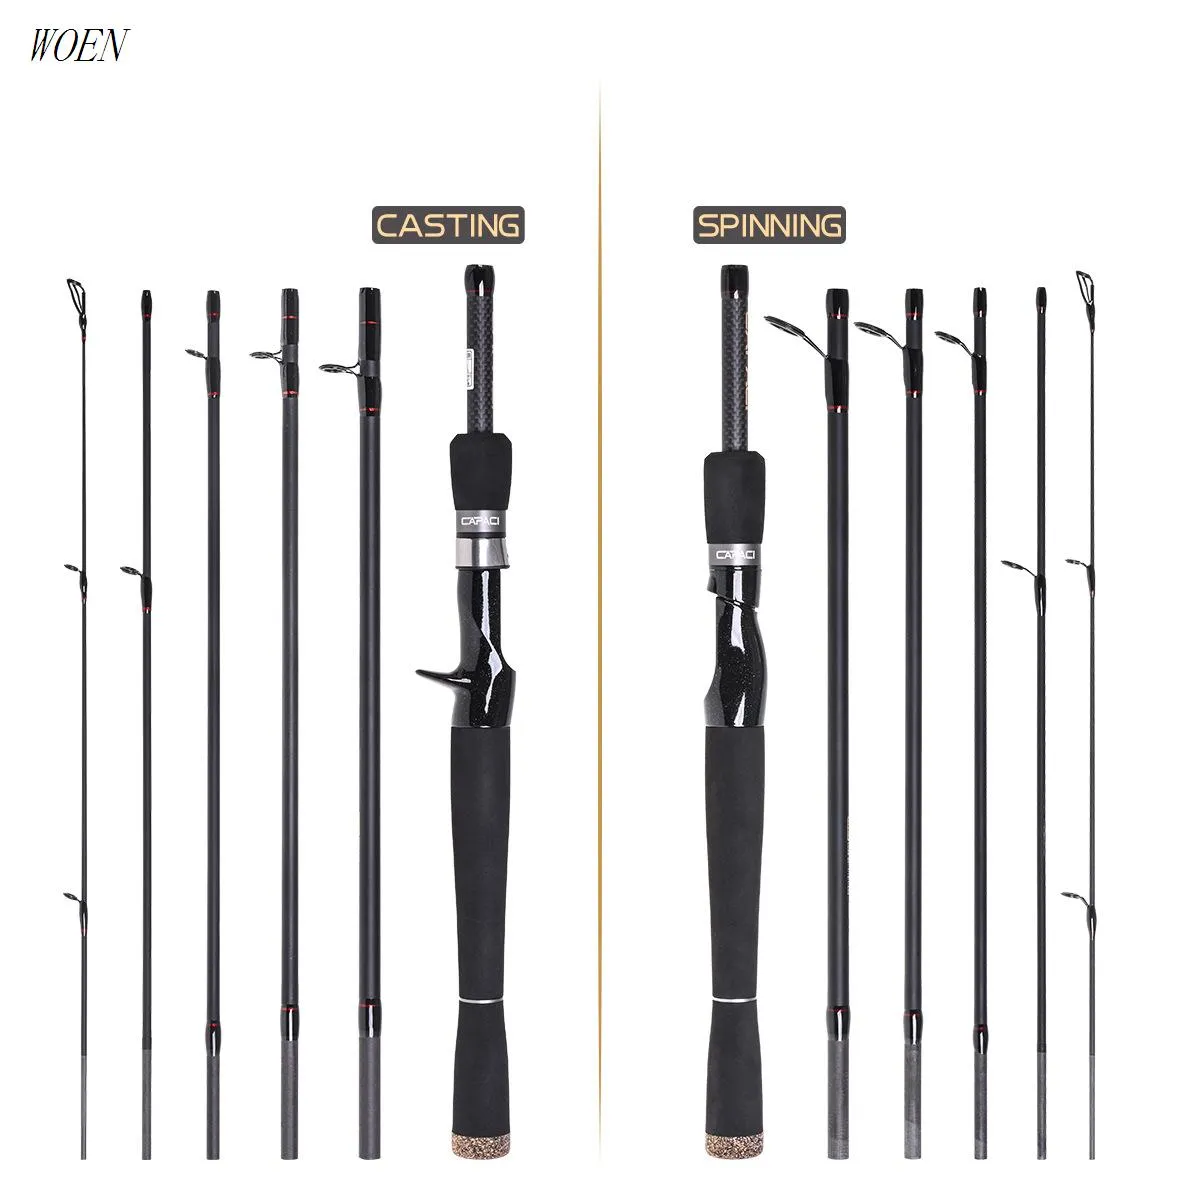 WOEN Portable 2.1/2.4 meters Carbon M tune Spinning Rods Straight handle Luya sea bass fishing rod